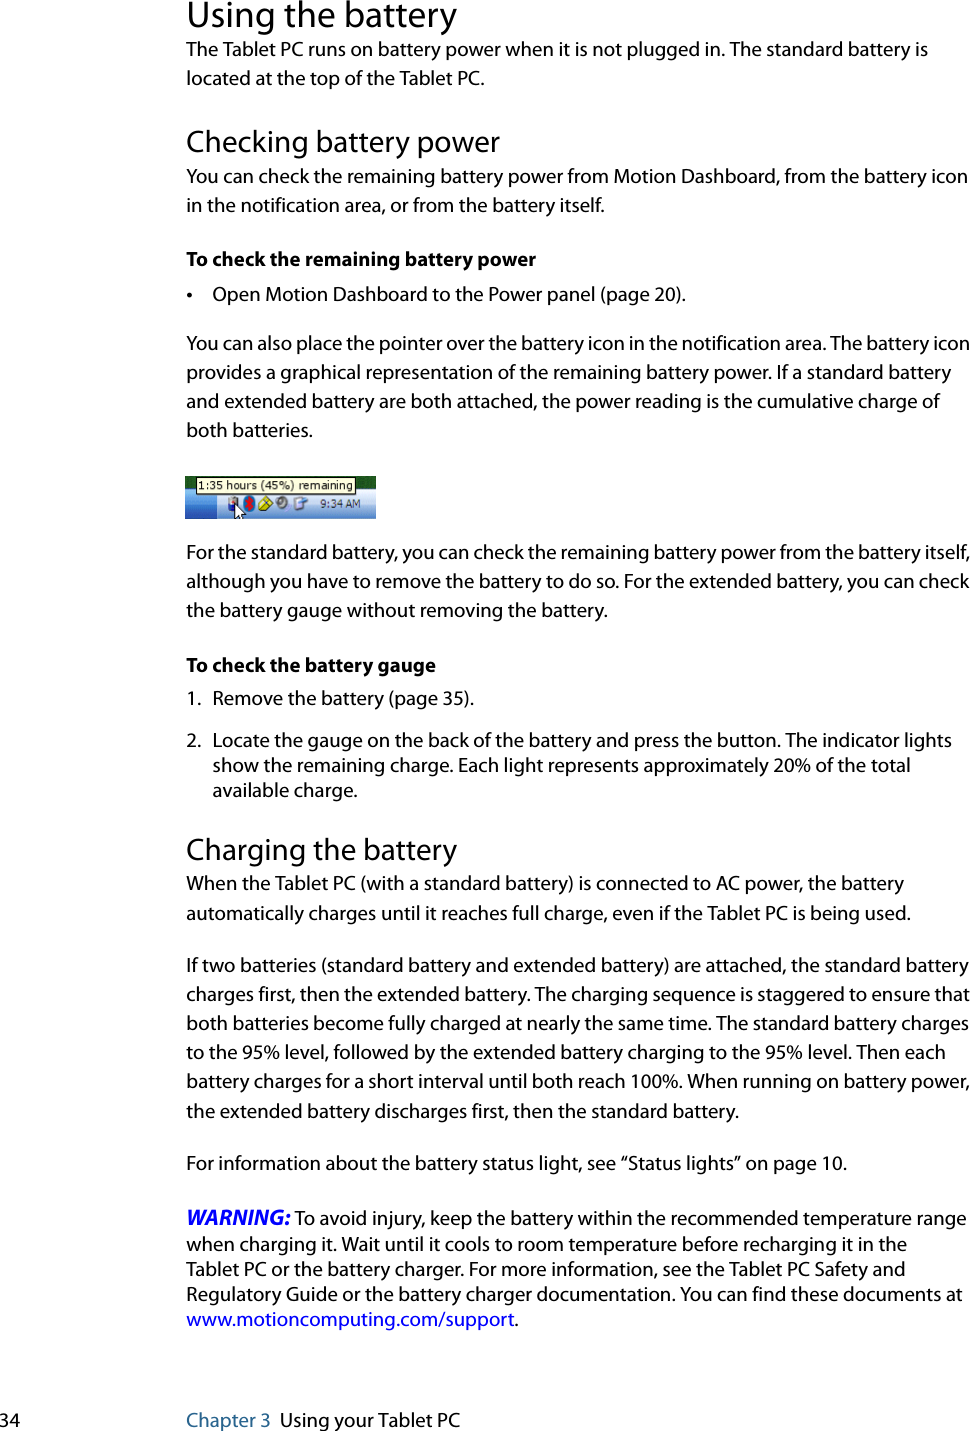 34 Chapter 3 Using your Tablet PCUsing the batteryThe Tablet PC runs on battery power when it is not plugged in. The standard battery is located at the top of the Tablet PC.Checking battery powerYou can check the remaining battery power from Motion Dashboard, from the battery icon in the notification area, or from the battery itself.To check the remaining battery power•Open Motion Dashboard to the Power panel (page 20).You can also place the pointer over the battery icon in the notification area. The battery icon provides a graphical representation of the remaining battery power. If a standard battery and extended battery are both attached, the power reading is the cumulative charge of both batteries.For the standard battery, you can check the remaining battery power from the battery itself, although you have to remove the battery to do so. For the extended battery, you can check the battery gauge without removing the battery.To check the battery gauge1. Remove the battery (page 35).2. Locate the gauge on the back of the battery and press the button. The indicator lights show the remaining charge. Each light represents approximately 20% of the total available charge.Charging the batteryWhen the Tablet PC (with a standard battery) is connected to AC power, the battery automatically charges until it reaches full charge, even if the Tablet PC is being used.If two batteries (standard battery and extended battery) are attached, the standard battery charges first, then the extended battery. The charging sequence is staggered to ensure that both batteries become fully charged at nearly the same time. The standard battery charges to the 95% level, followed by the extended battery charging to the 95% level. Then each battery charges for a short interval until both reach 100%. When running on battery power, the extended battery discharges first, then the standard battery.For information about the battery status light, see “Status lights” on page 10.WARNING: To avoid injury, keep the battery within the recommended temperature range when charging it. Wait until it cools to room temperature before recharging it in the Tablet PC or the battery charger. For more information, see the Tablet PC Safety and Regulatory Guide or the battery charger documentation. You can find these documents at www.motioncomputing.com/support.